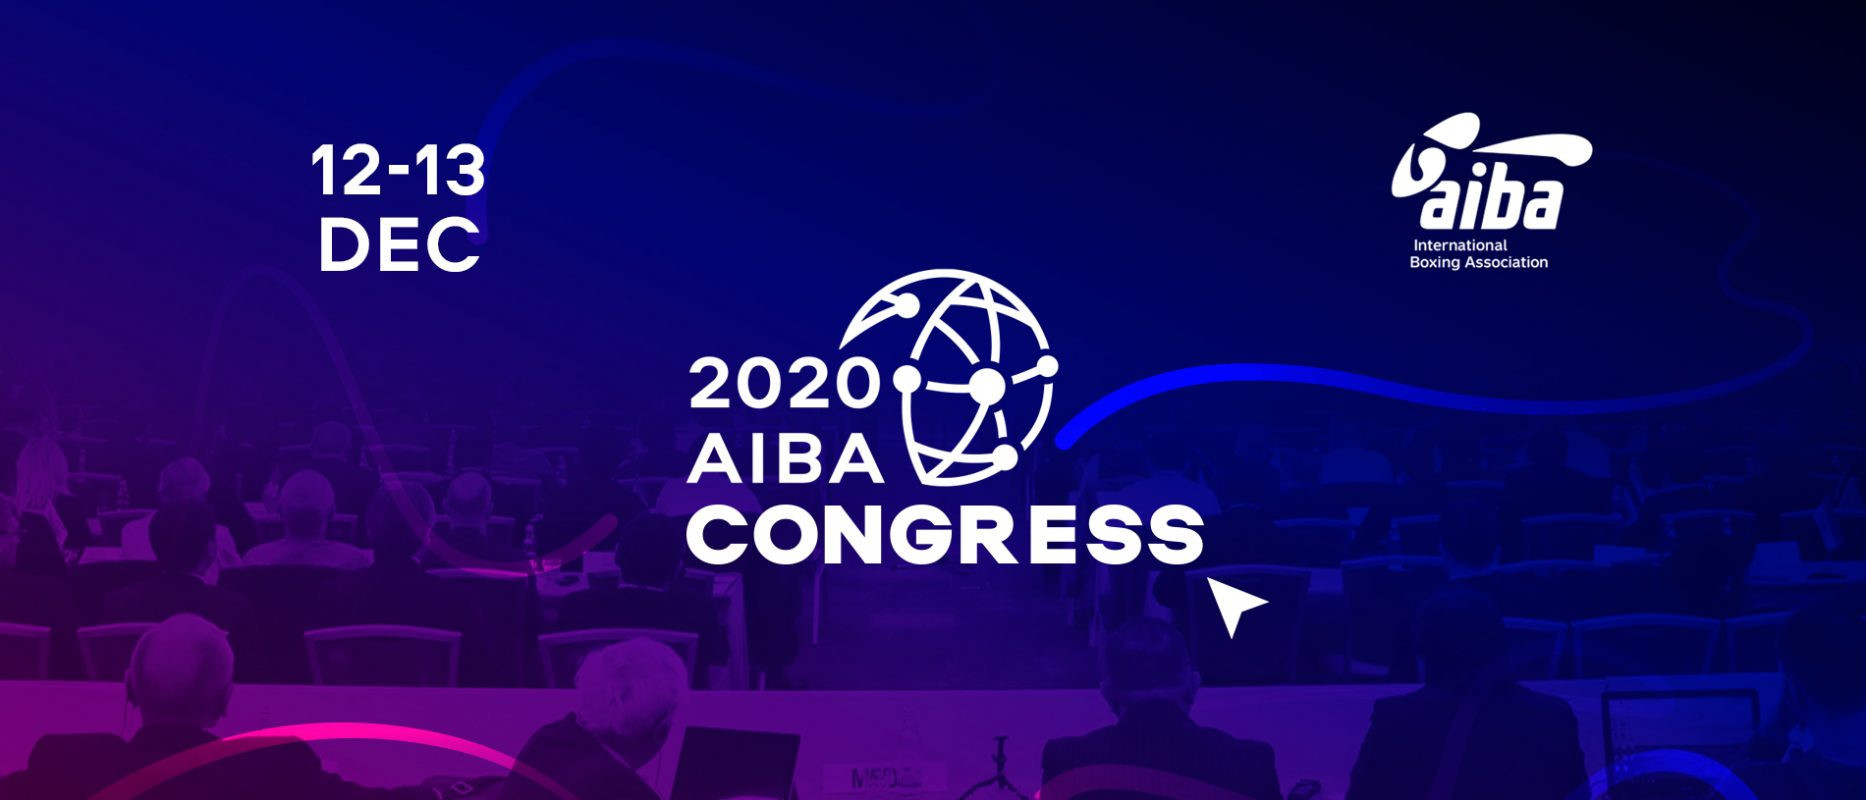 AIBA will elect a new President at the governing body's Congress later this month ©AIBA